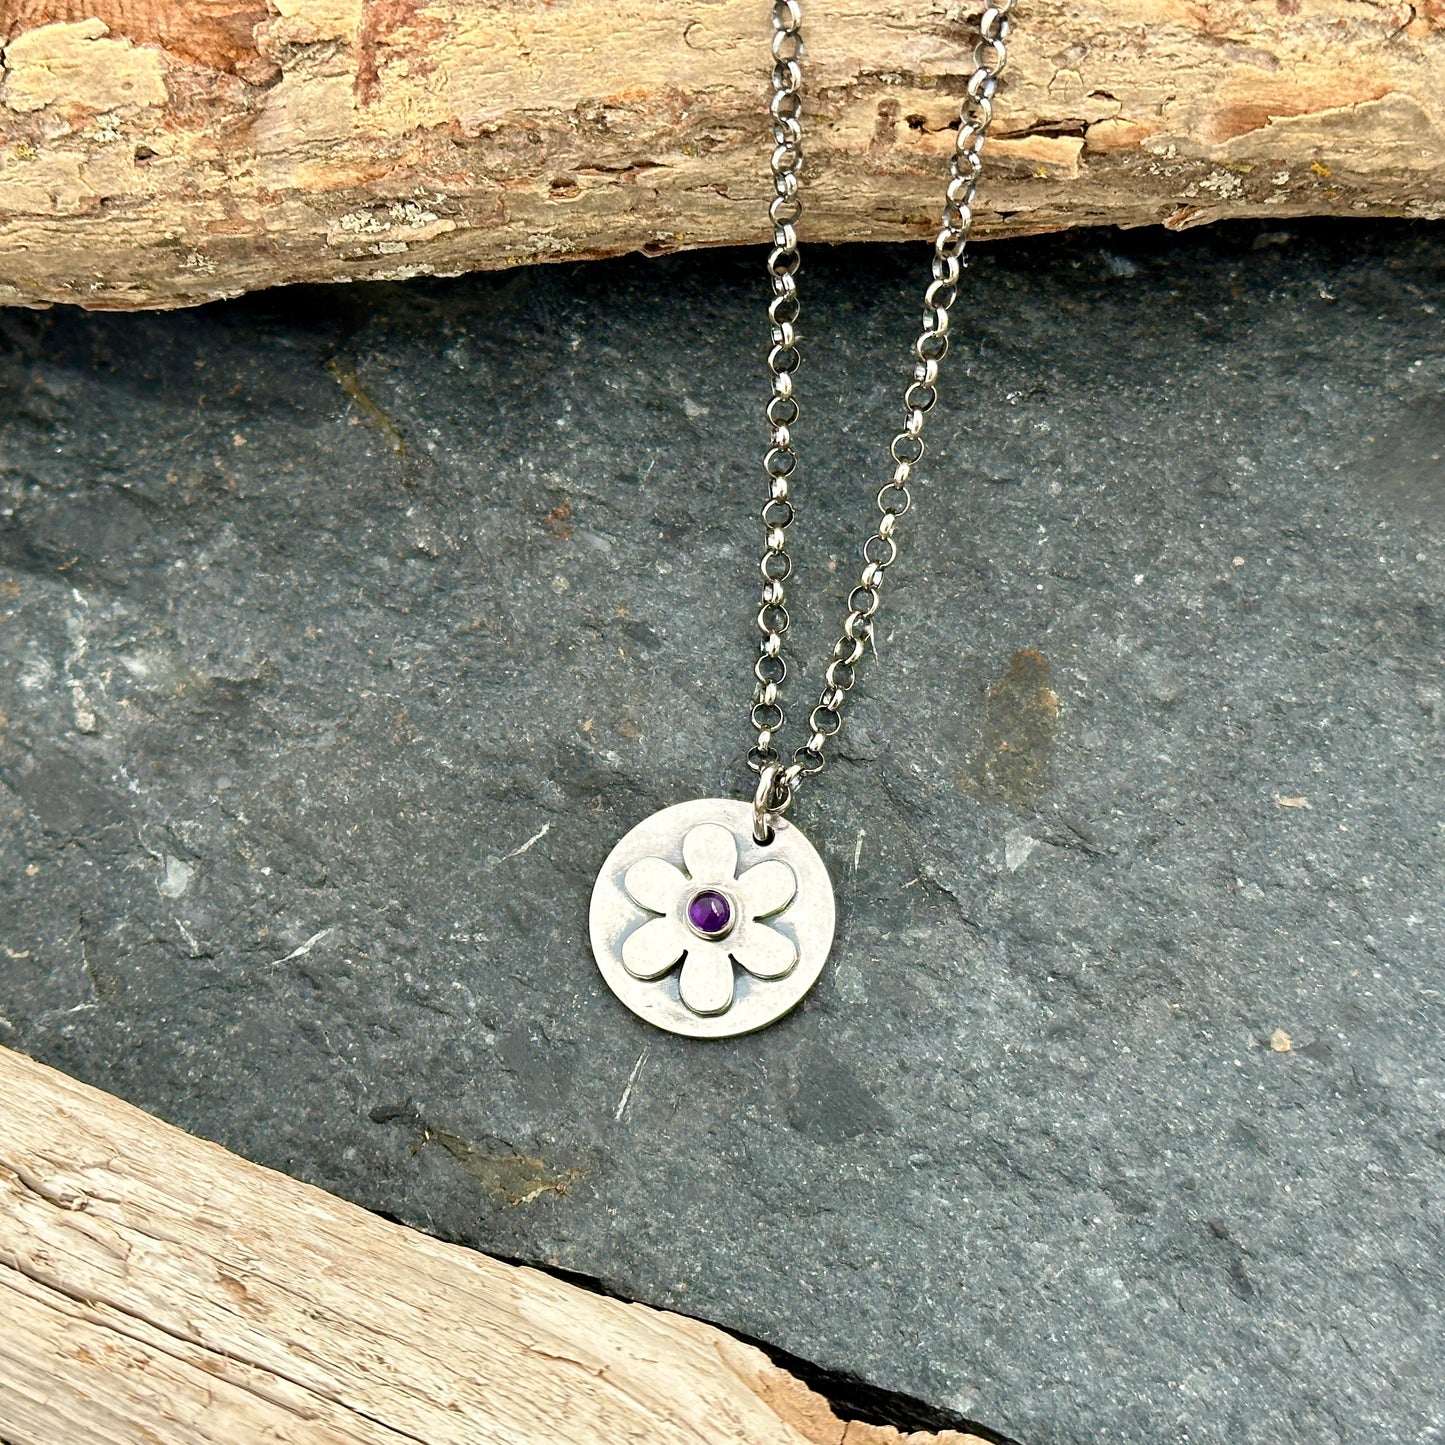 Blooming Daisy Amethyst Necklace